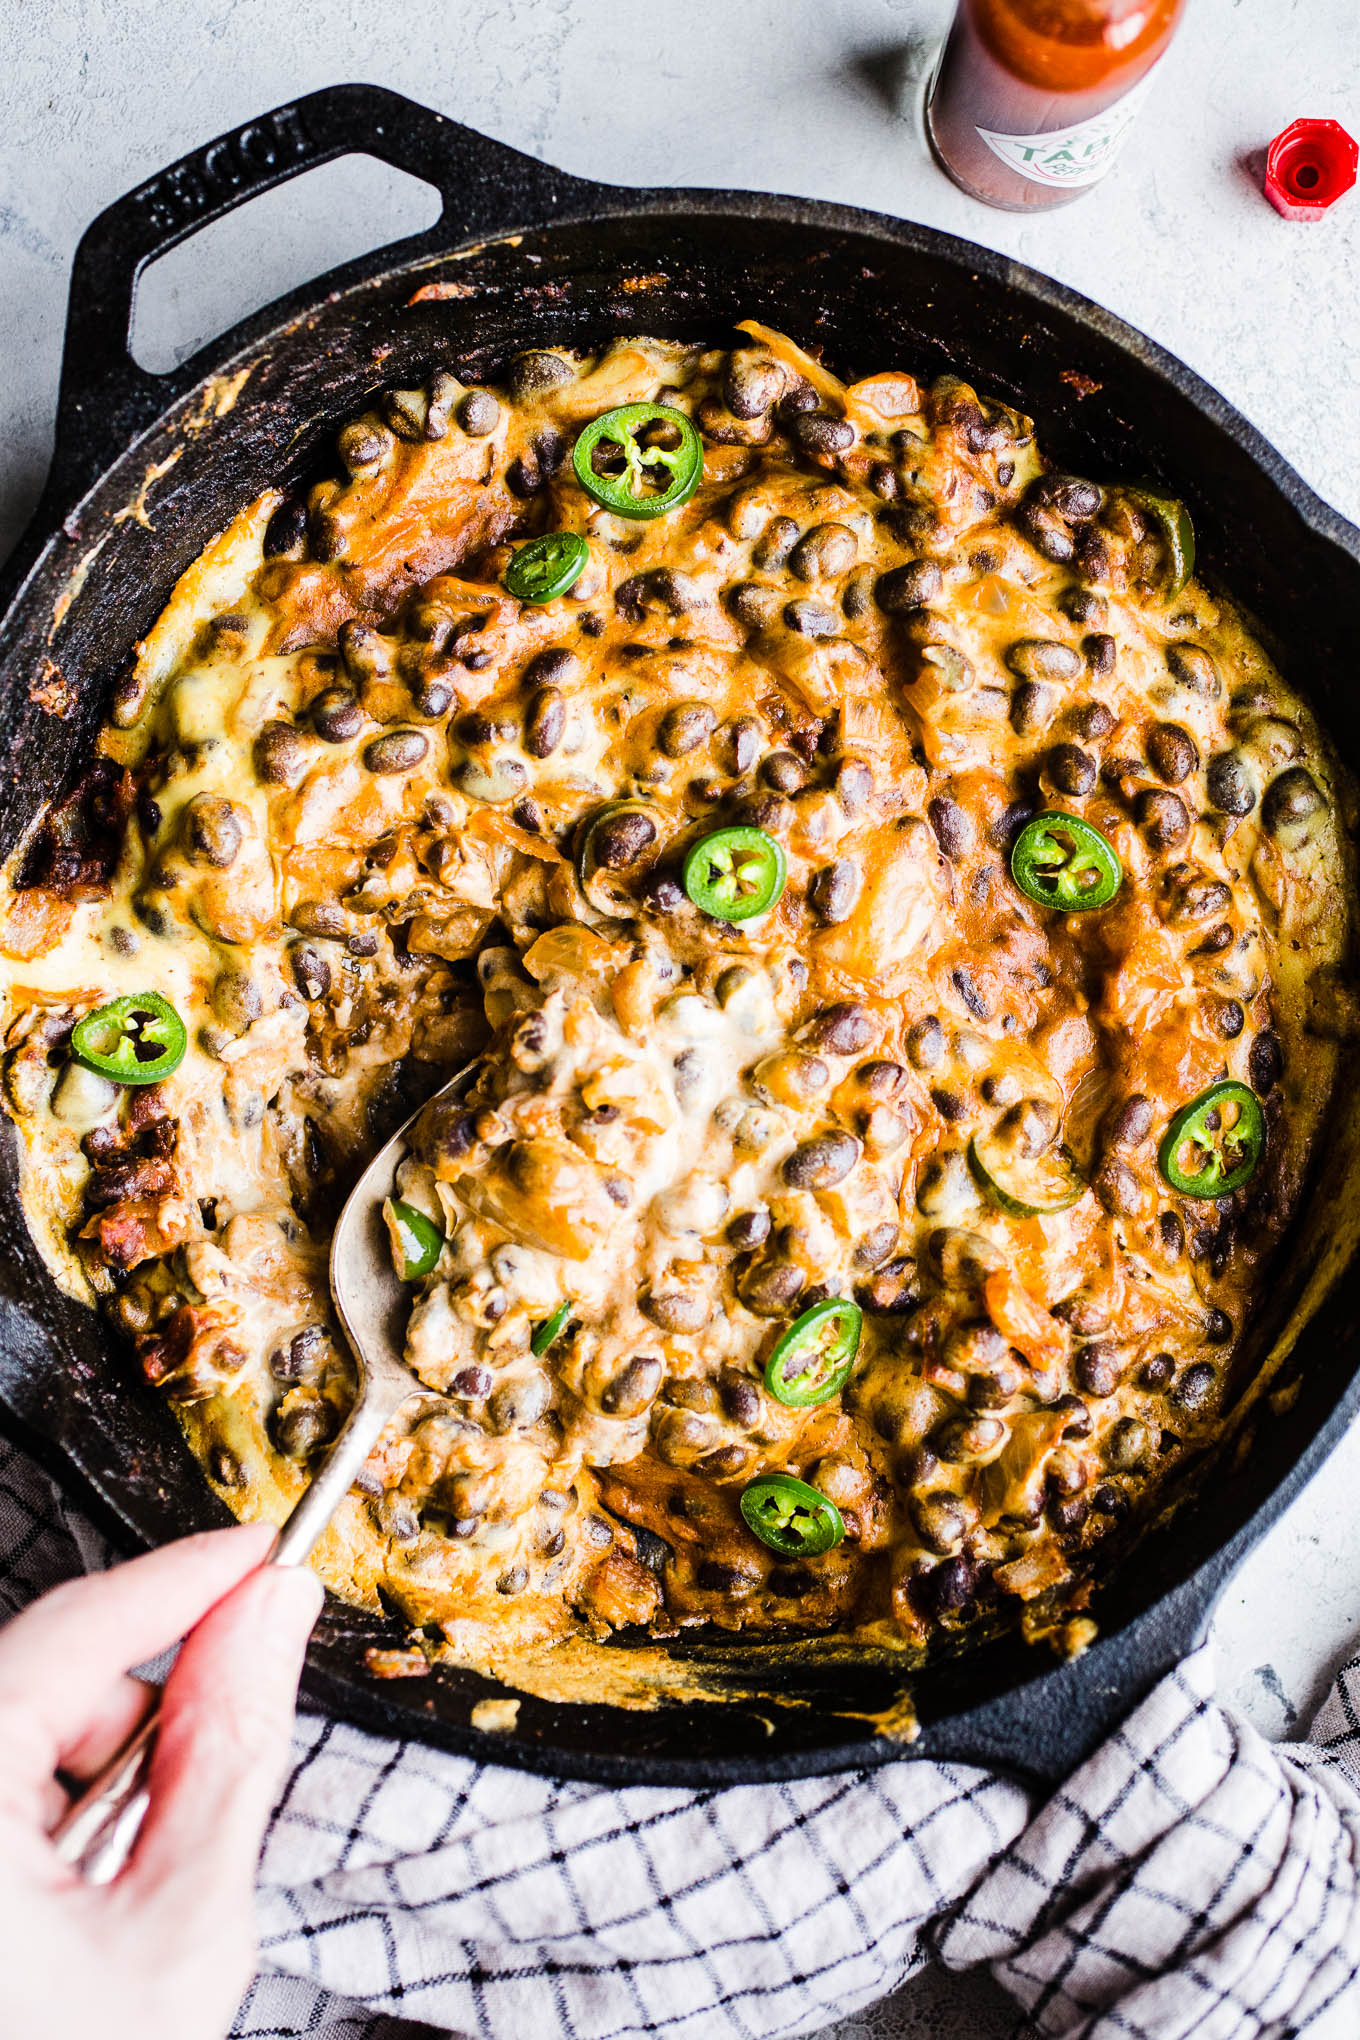 Baked black beans and cashew cheese